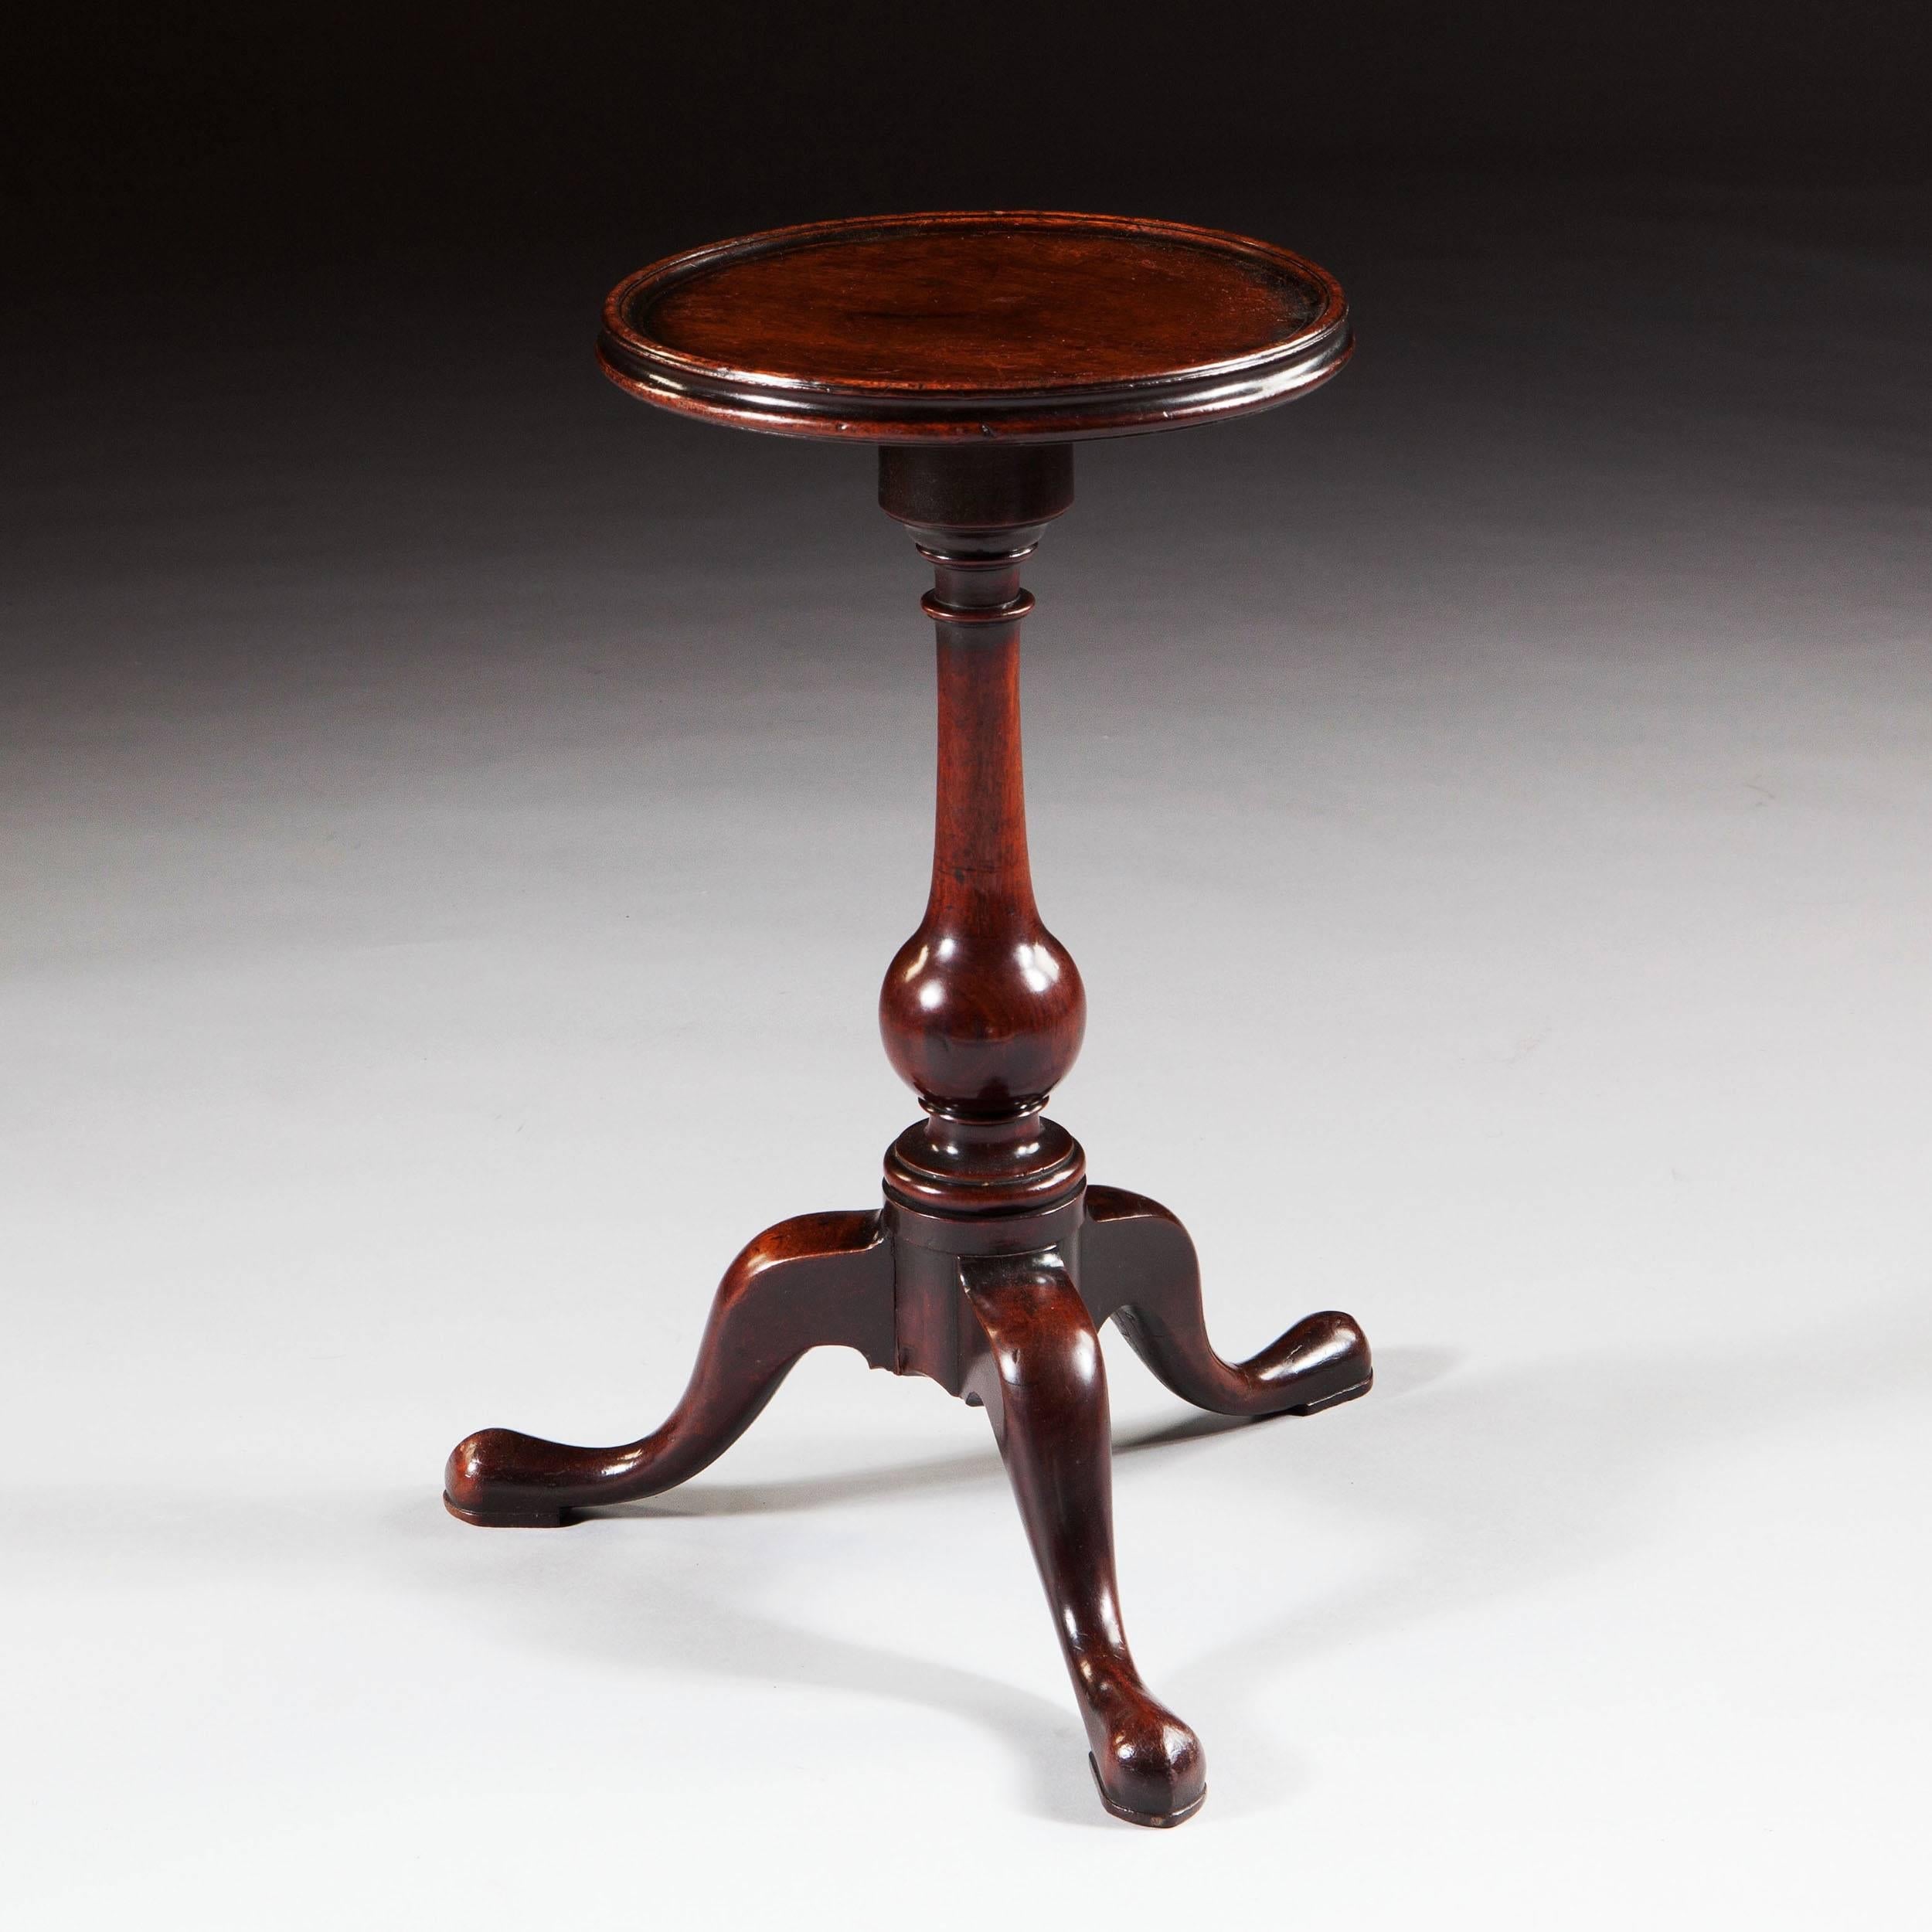 England, circa 1740.

A George II mahogany tripod candle stand, the circular top with a moulded border on a baluster turned column and three down swept cabriole legs with pad feet.

Measures: Height 20